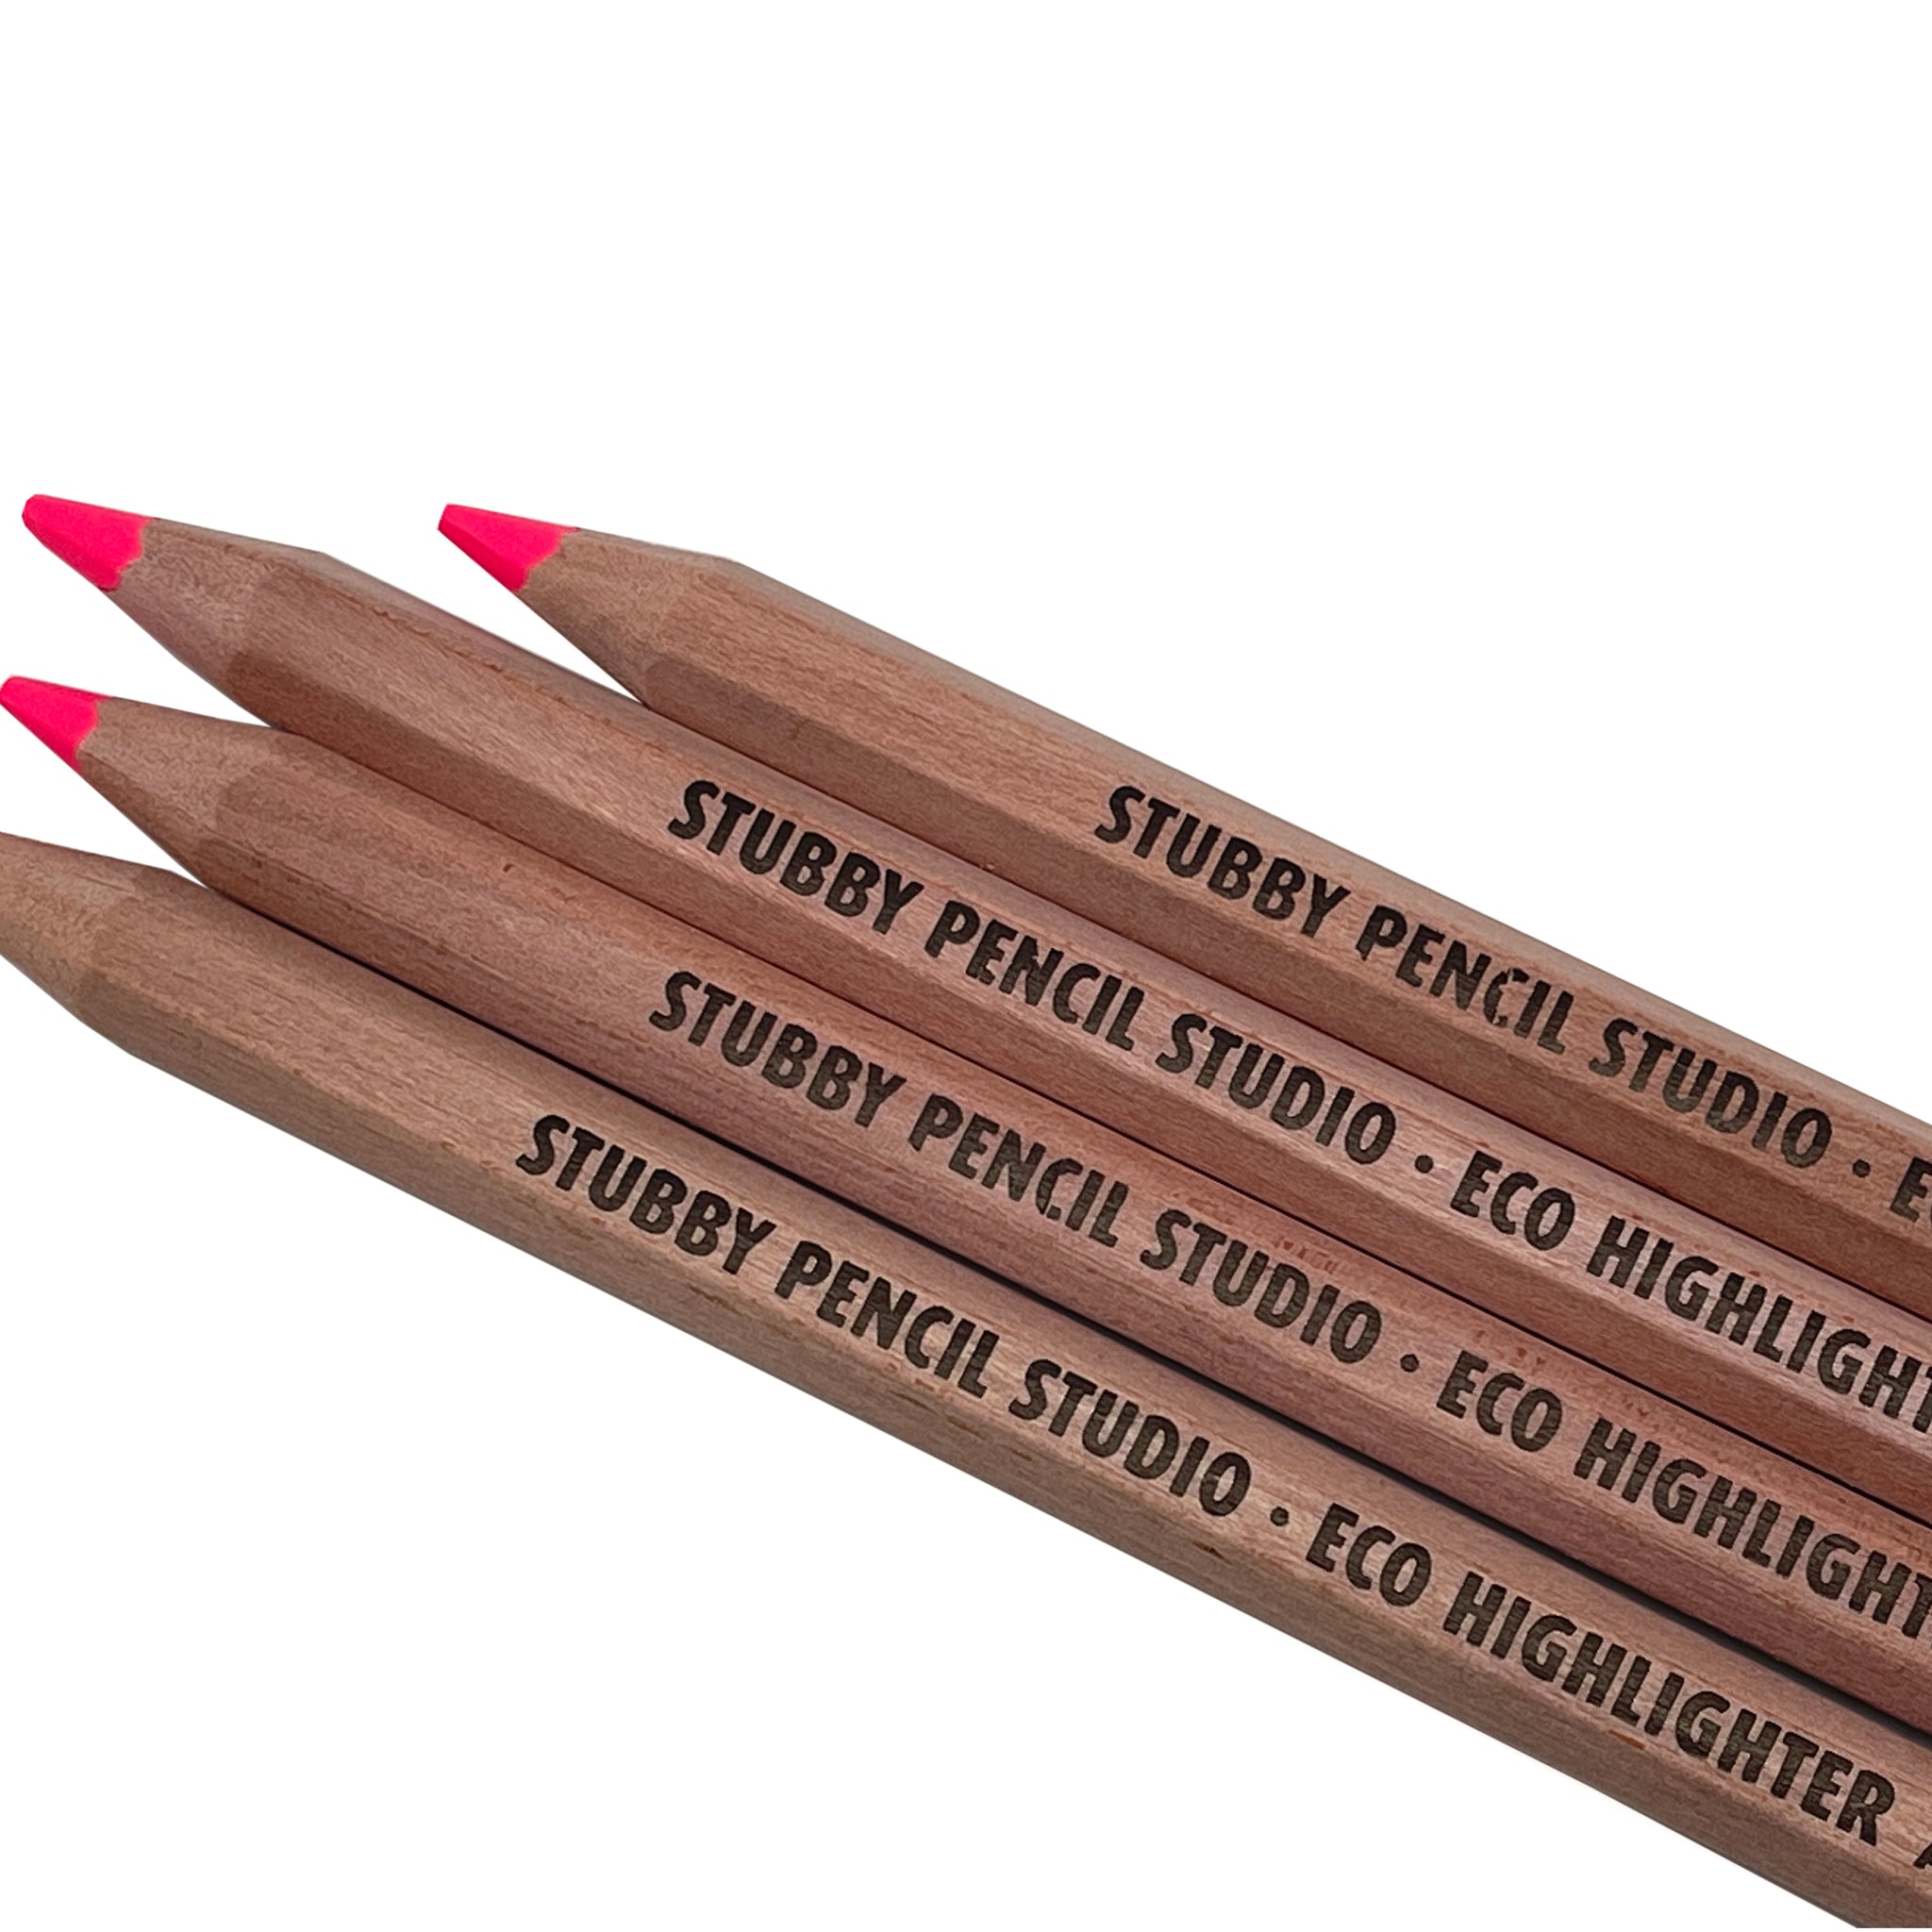 Bible Highlighters - Set of 12 Dusty Colors — Shuttle Art